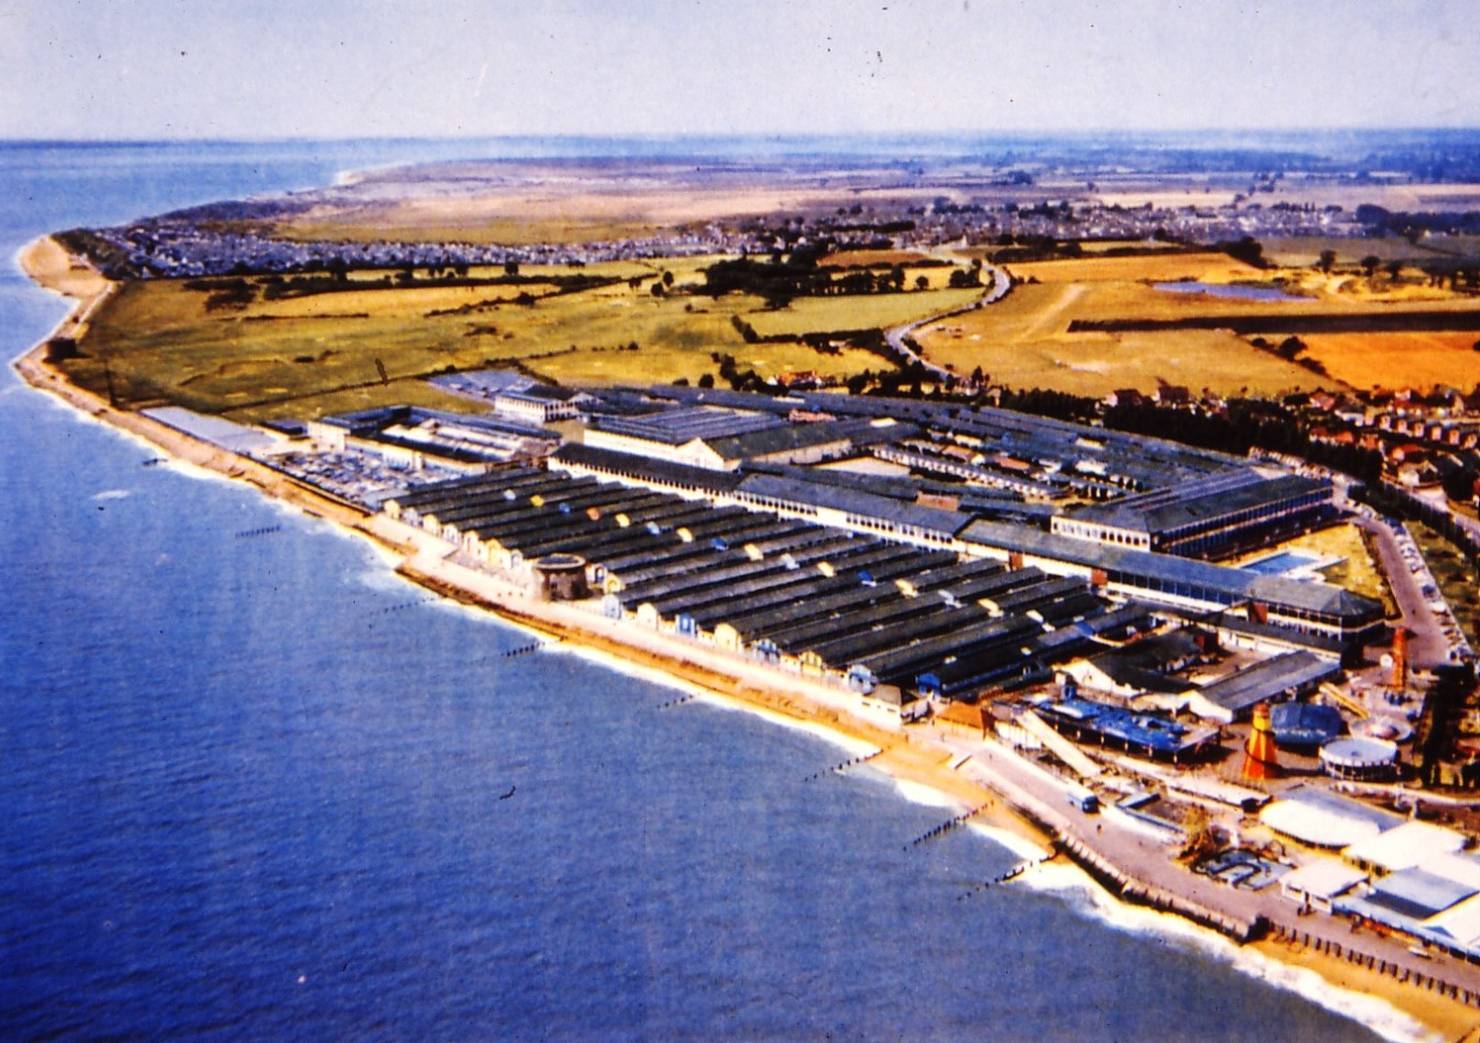 Eye in the sky - the Clacton coastline, featuring the former Butlins camp